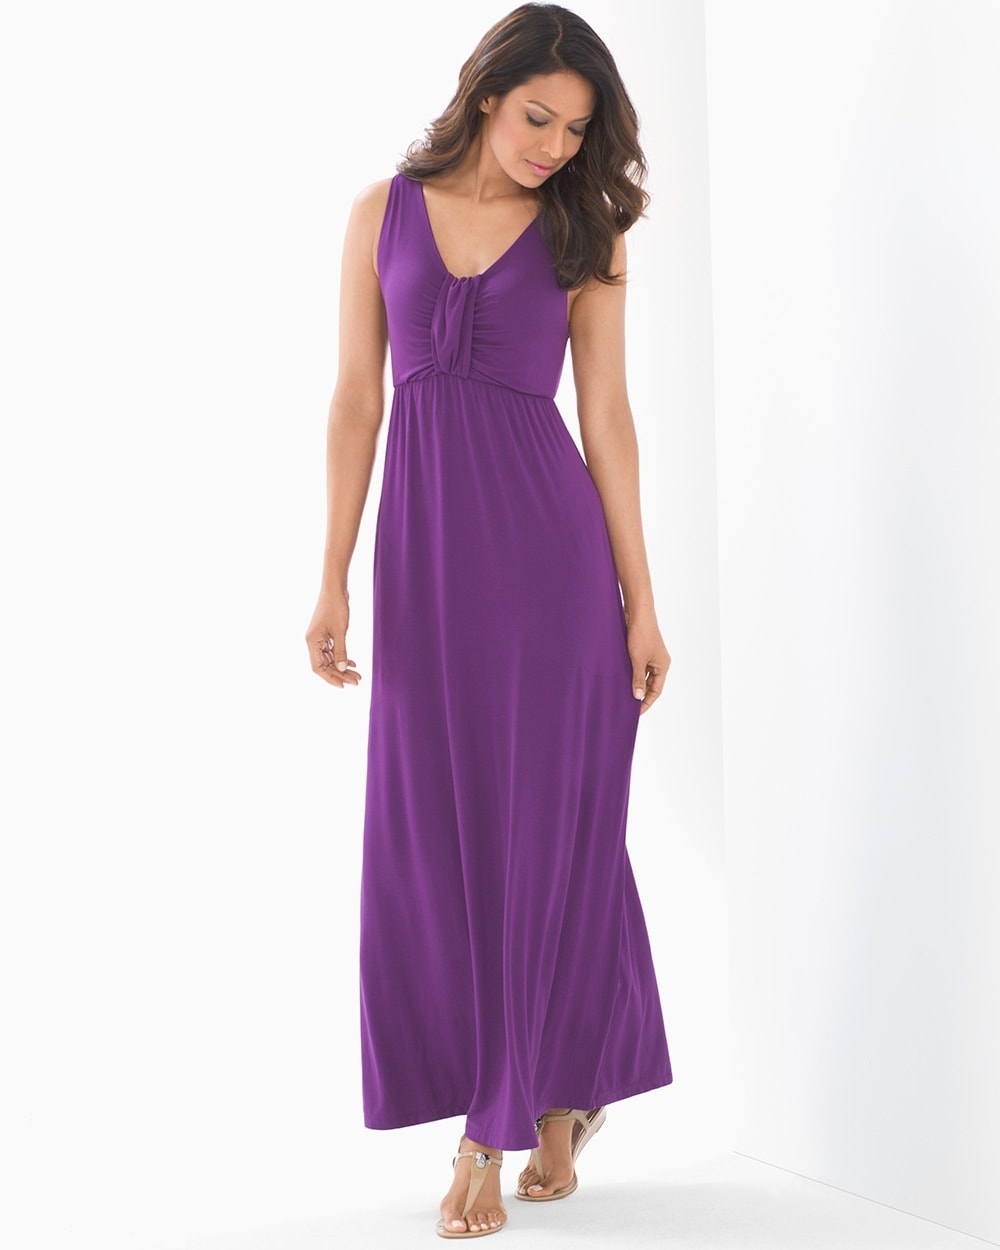 Soft Jersey Sleeveless Knotted V-Neck Maxi Dress Imperial Purple